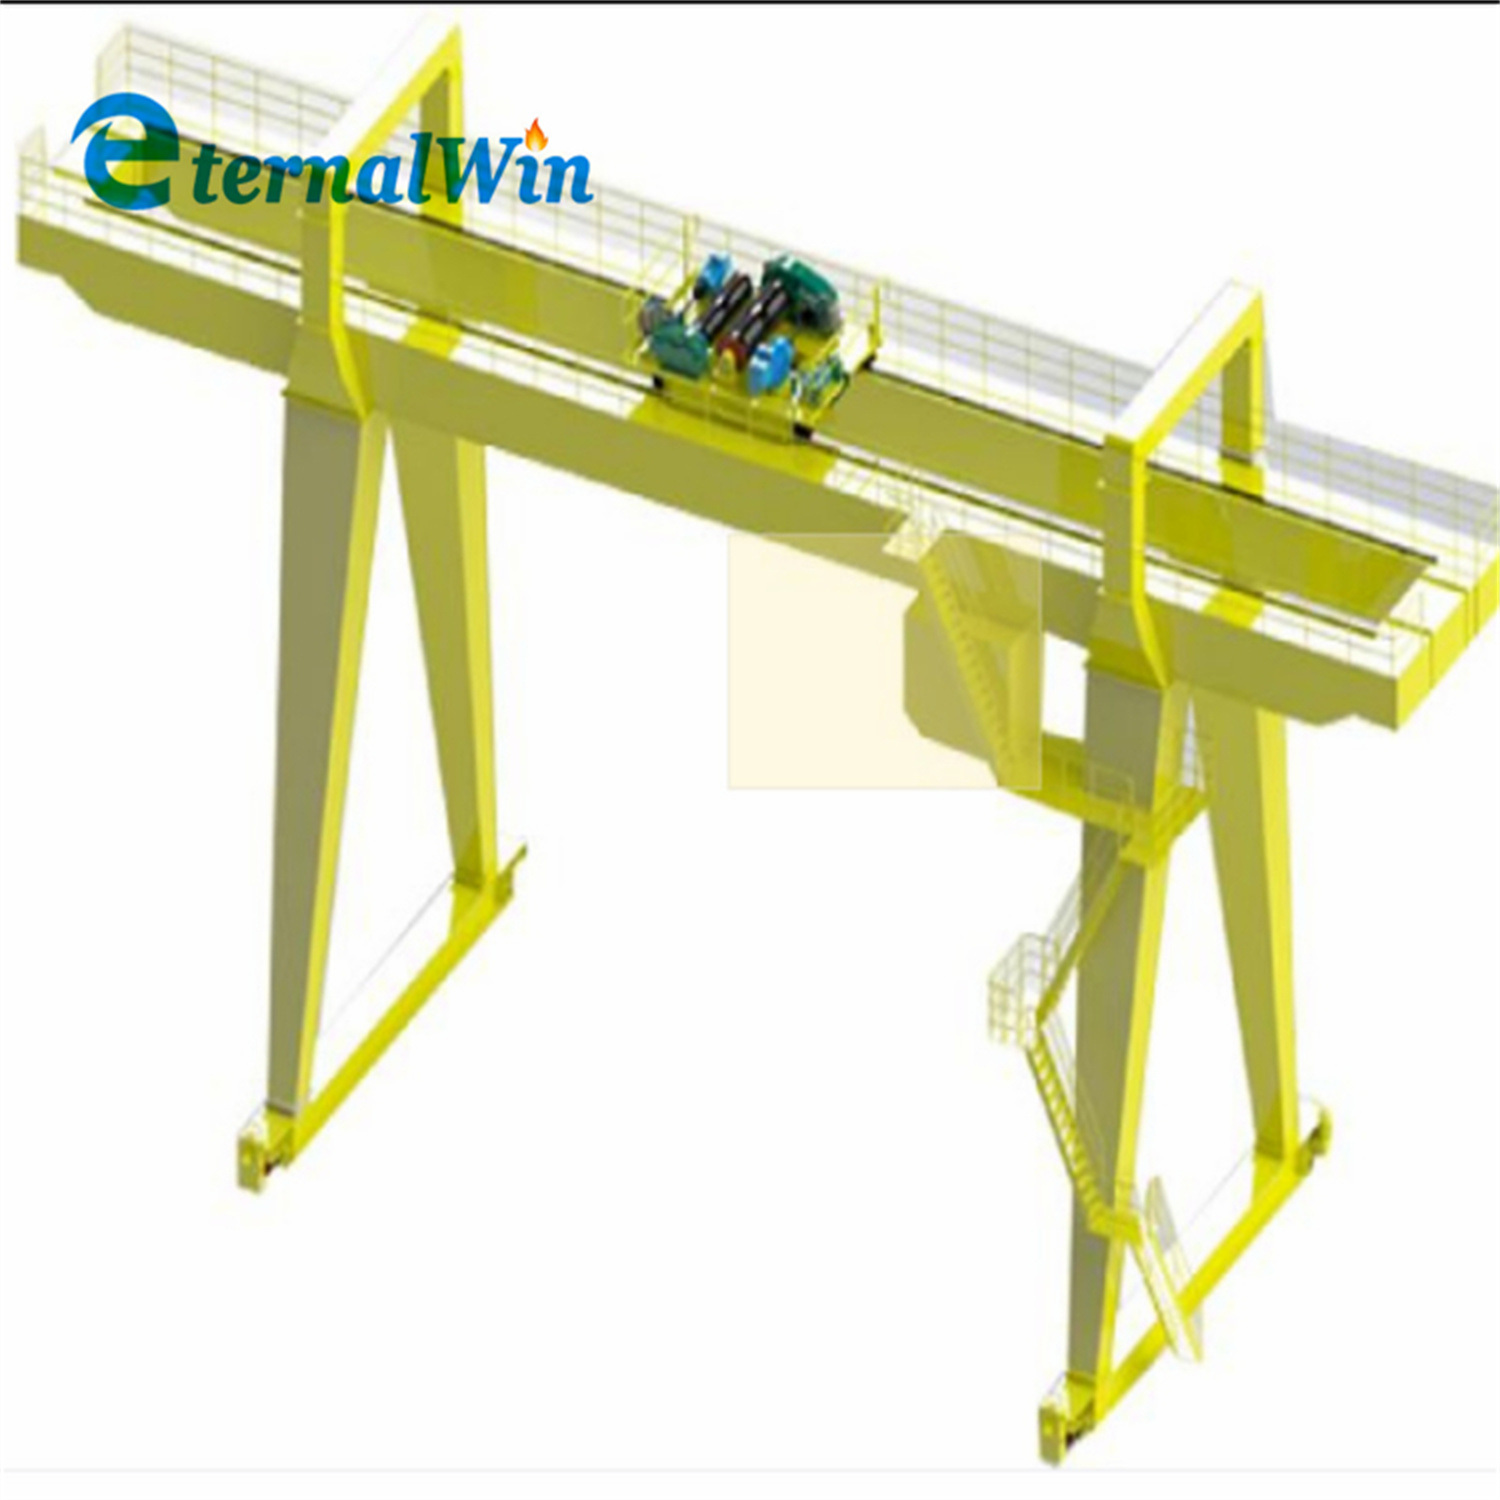 Cab Controlled Double Girder Gantry Crane with Winch System